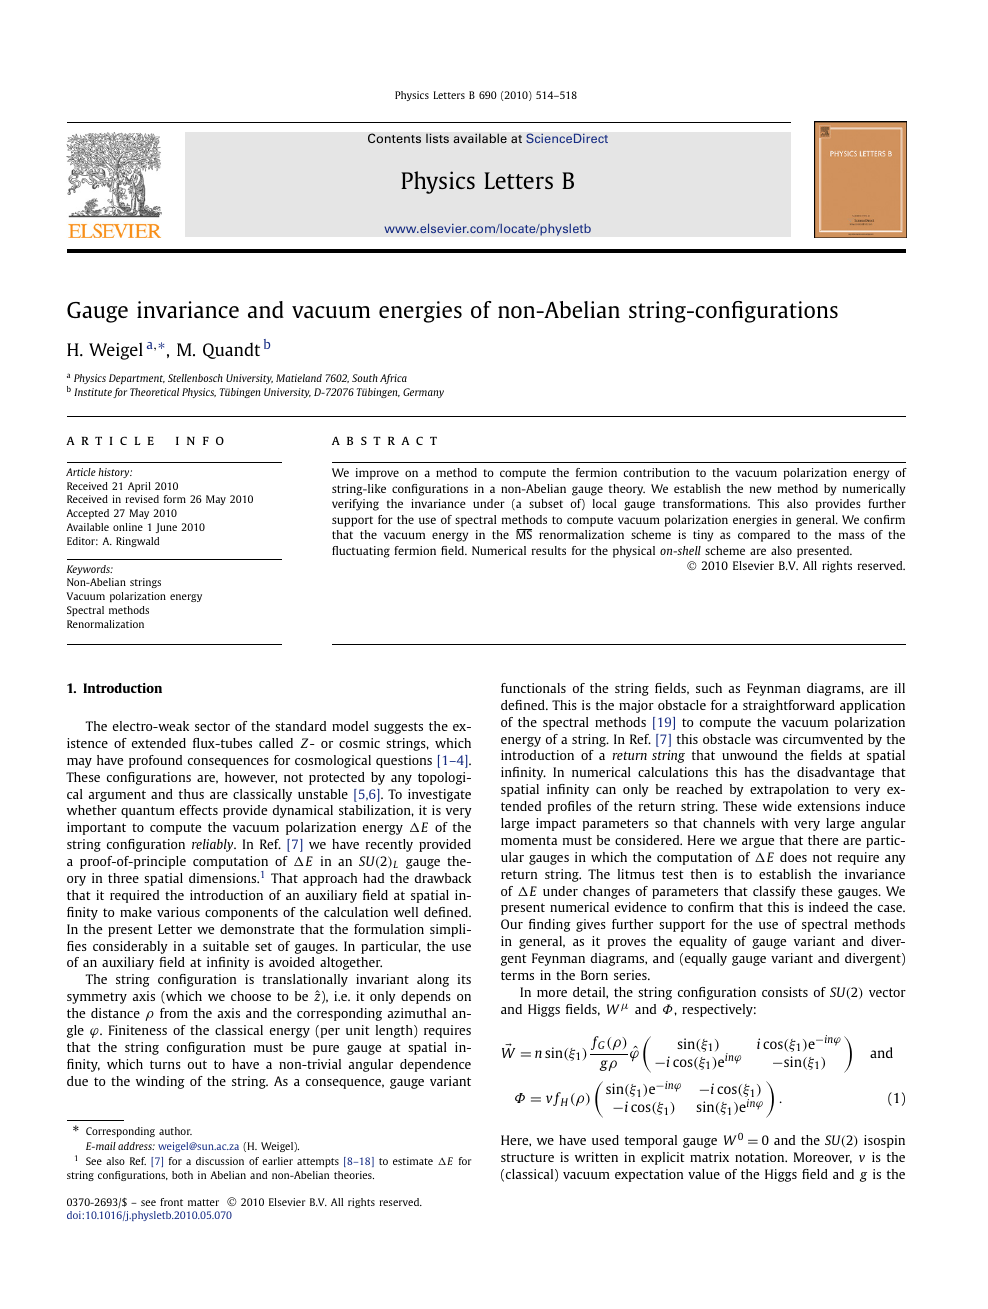 Gauge Invariance And Vacuum Energies Of Non Abelian String Configurations Topic Of Research Paper In Physical Sciences Download Scholarly Article Pdf And Read For Free On Cyberleninka Open Science Hub